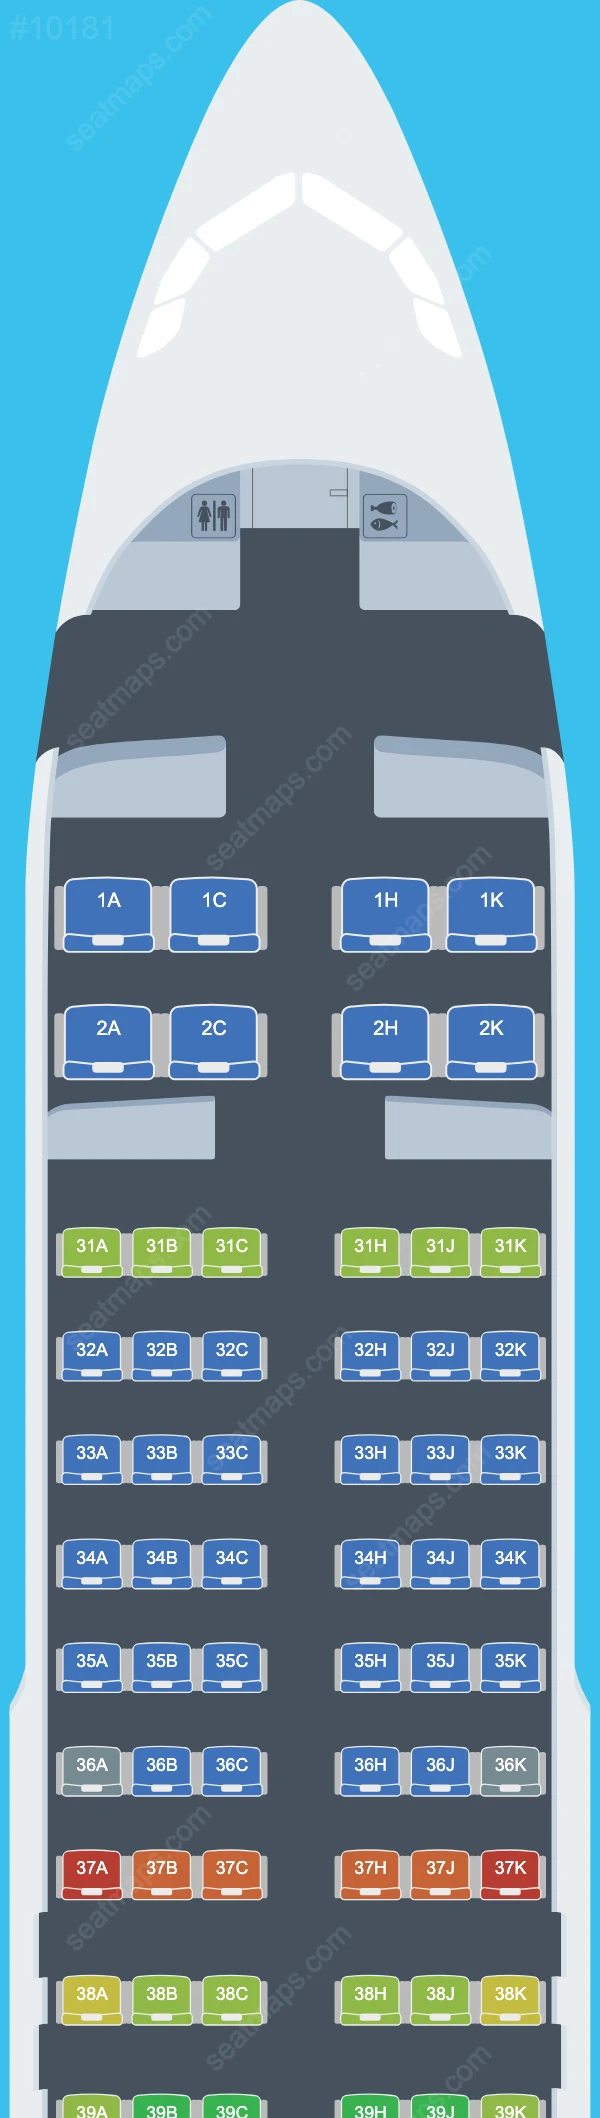 Juneyao Air Airbus A320-200neo seatmap preview